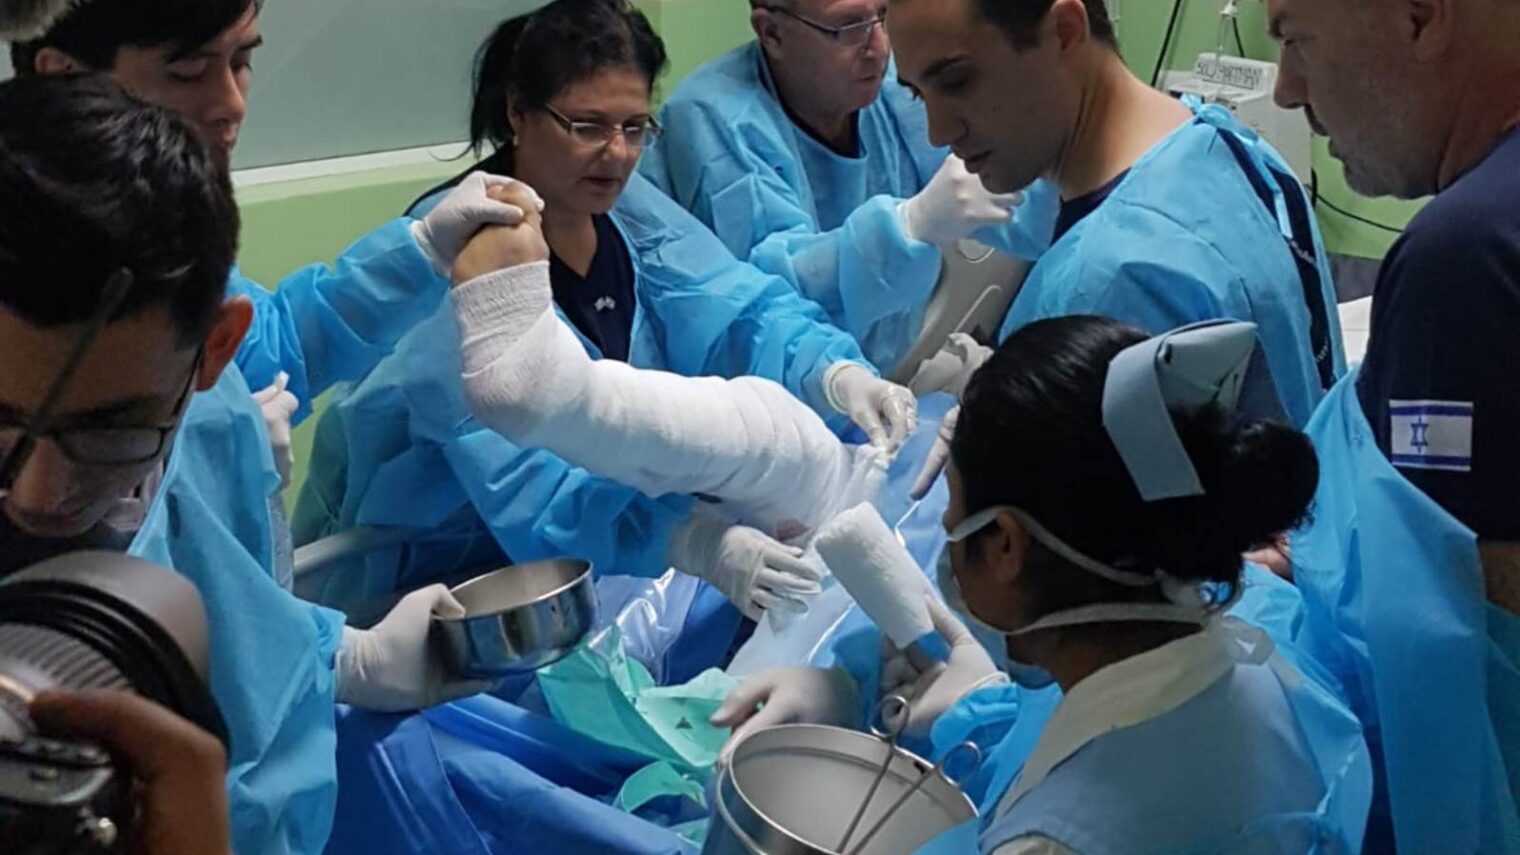 Israeli medical team treating a burn victim in Guatemala City’s Roosevelt Hospital following the Fuego volcano eruption. Photo courtesy of the Ministry of Foreign Affairs